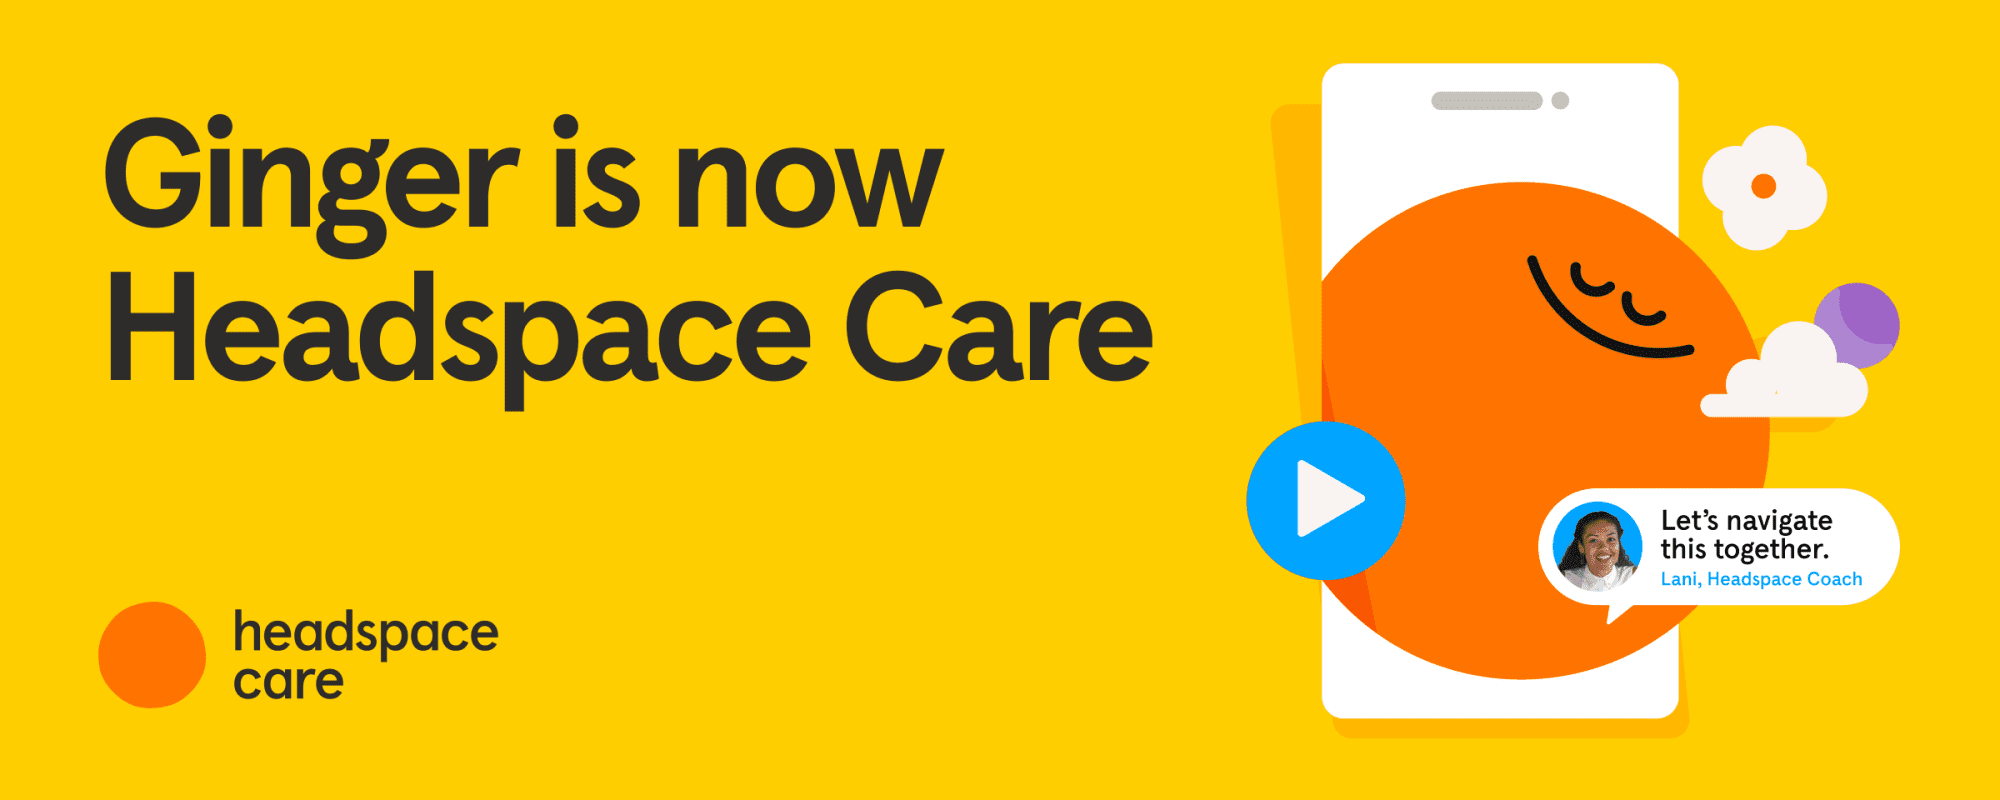 Ginger is now Headspace Care graphic